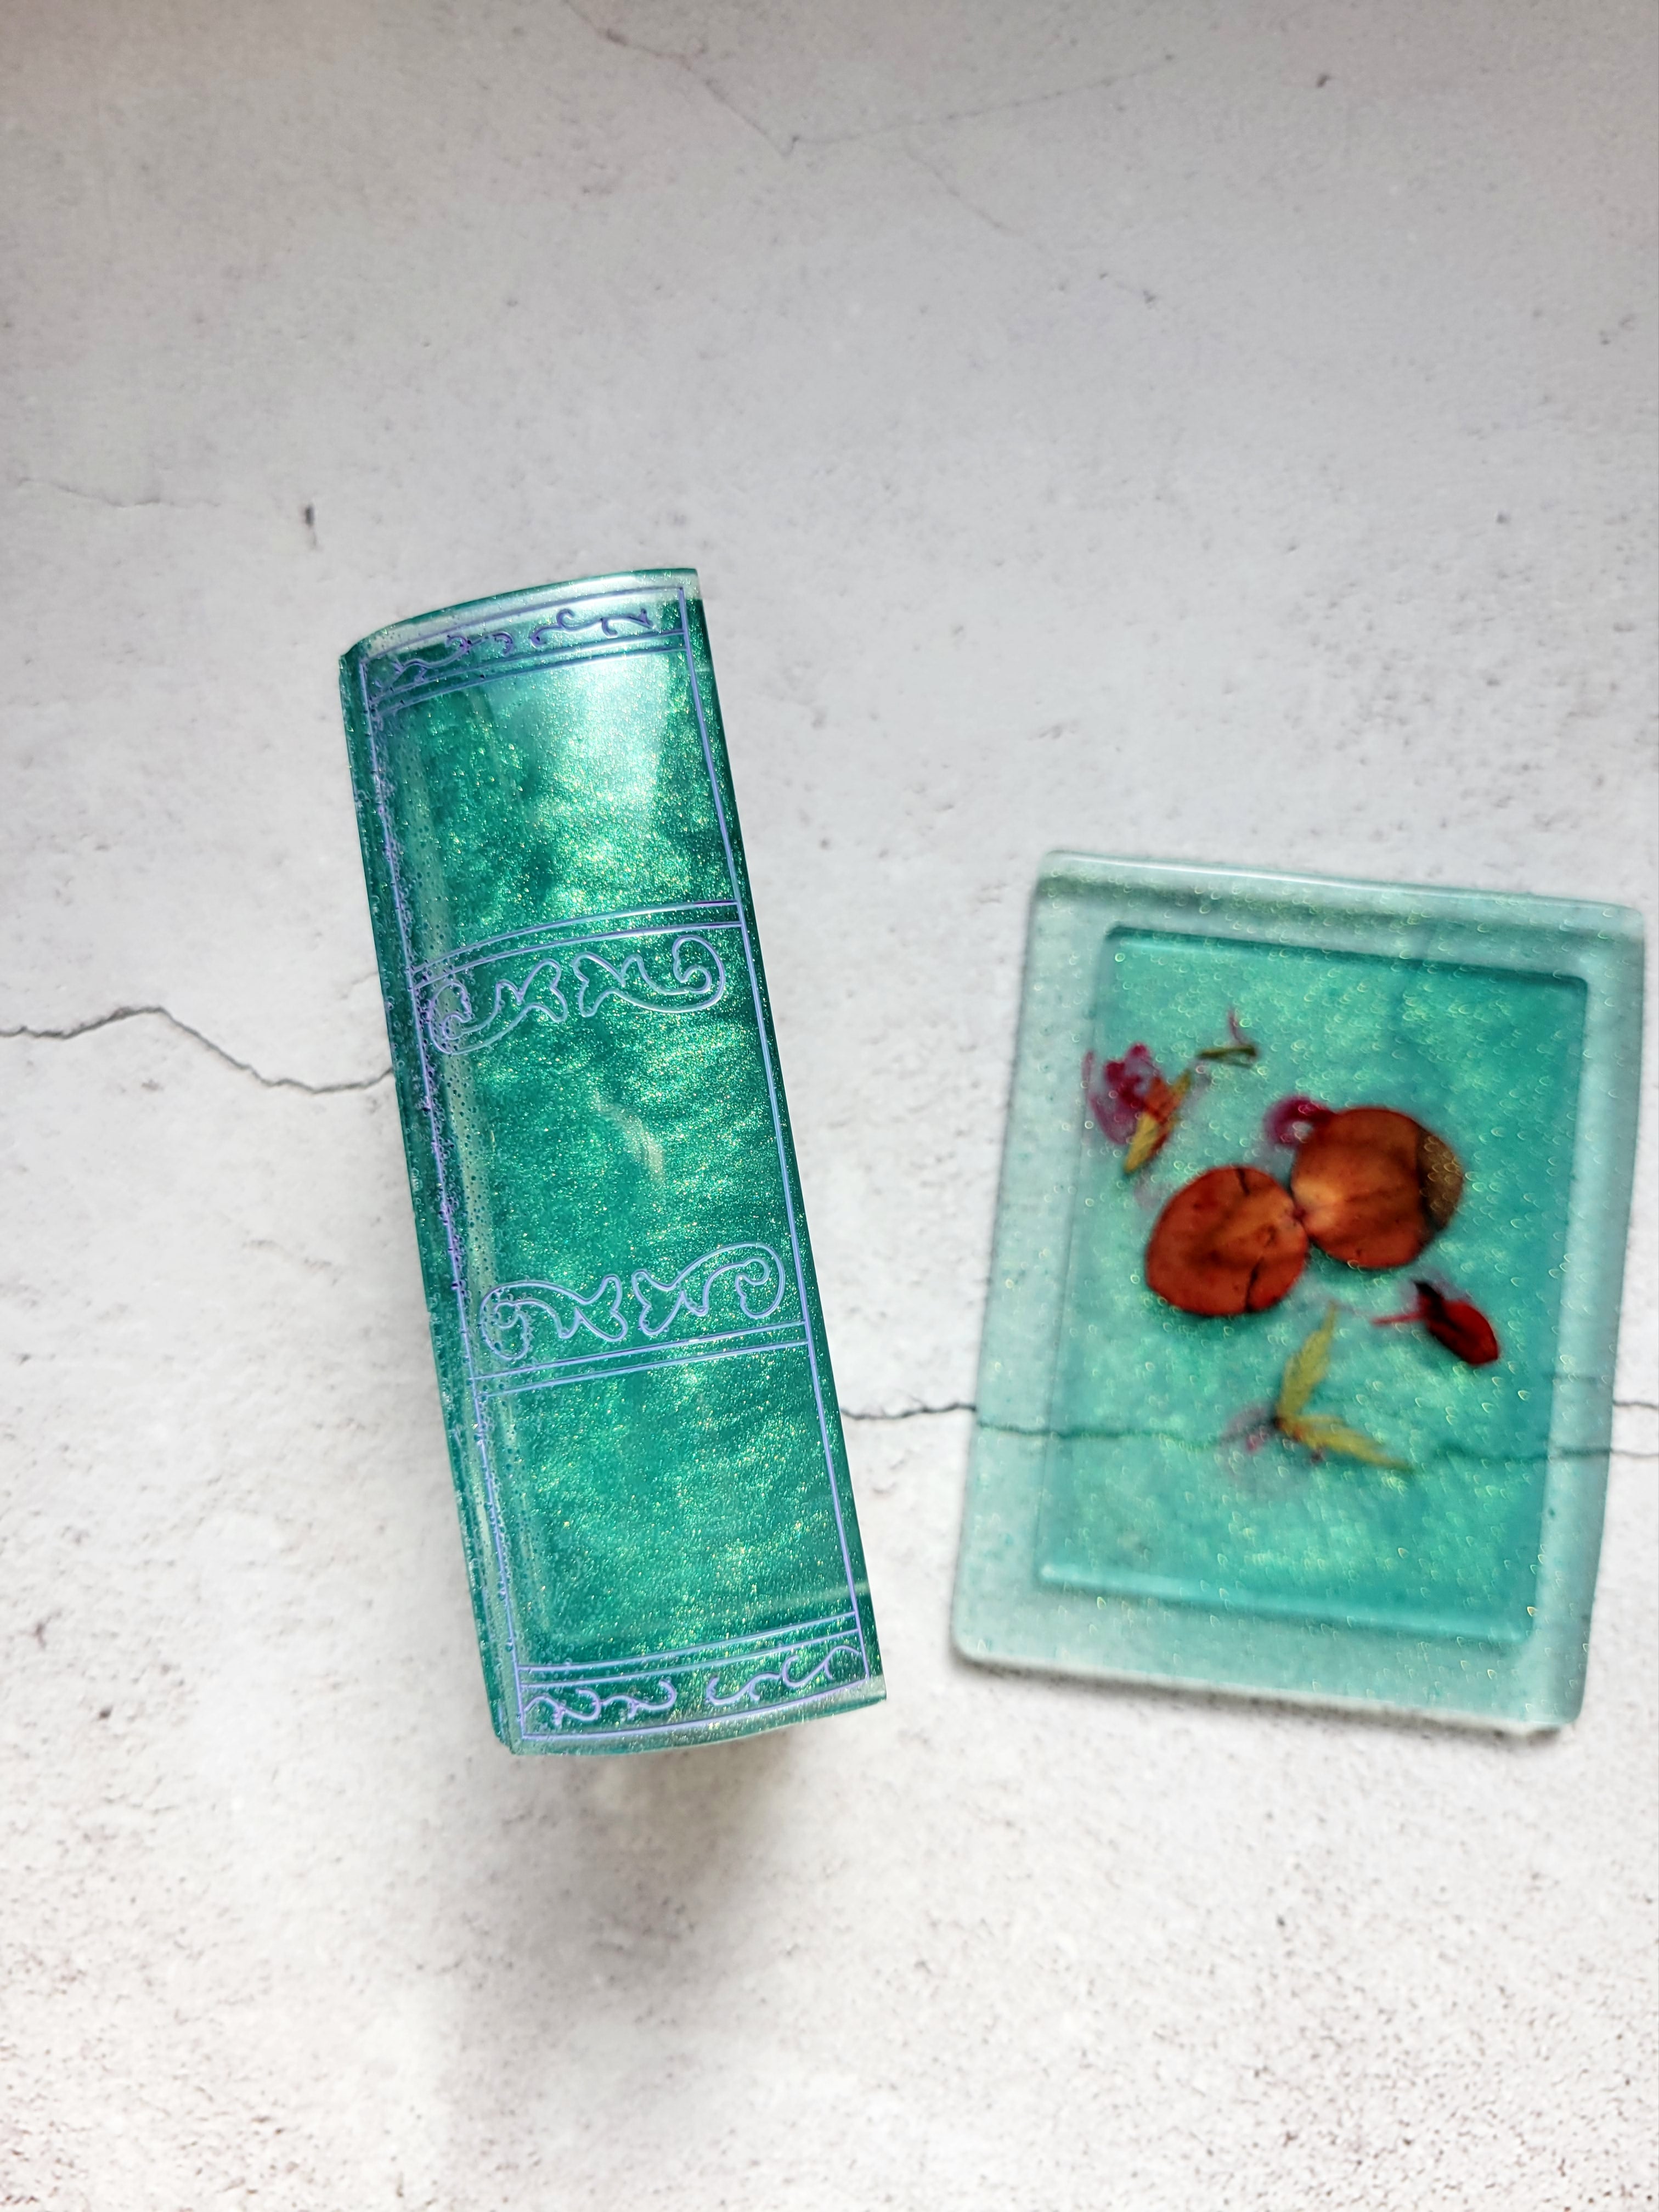 a resin made dice vault in the style of a book. The lid is beside the box to show the design of plant leaves. The box is on its side to show the purple painted embellishments on the spine.  It's a shimmering green color.